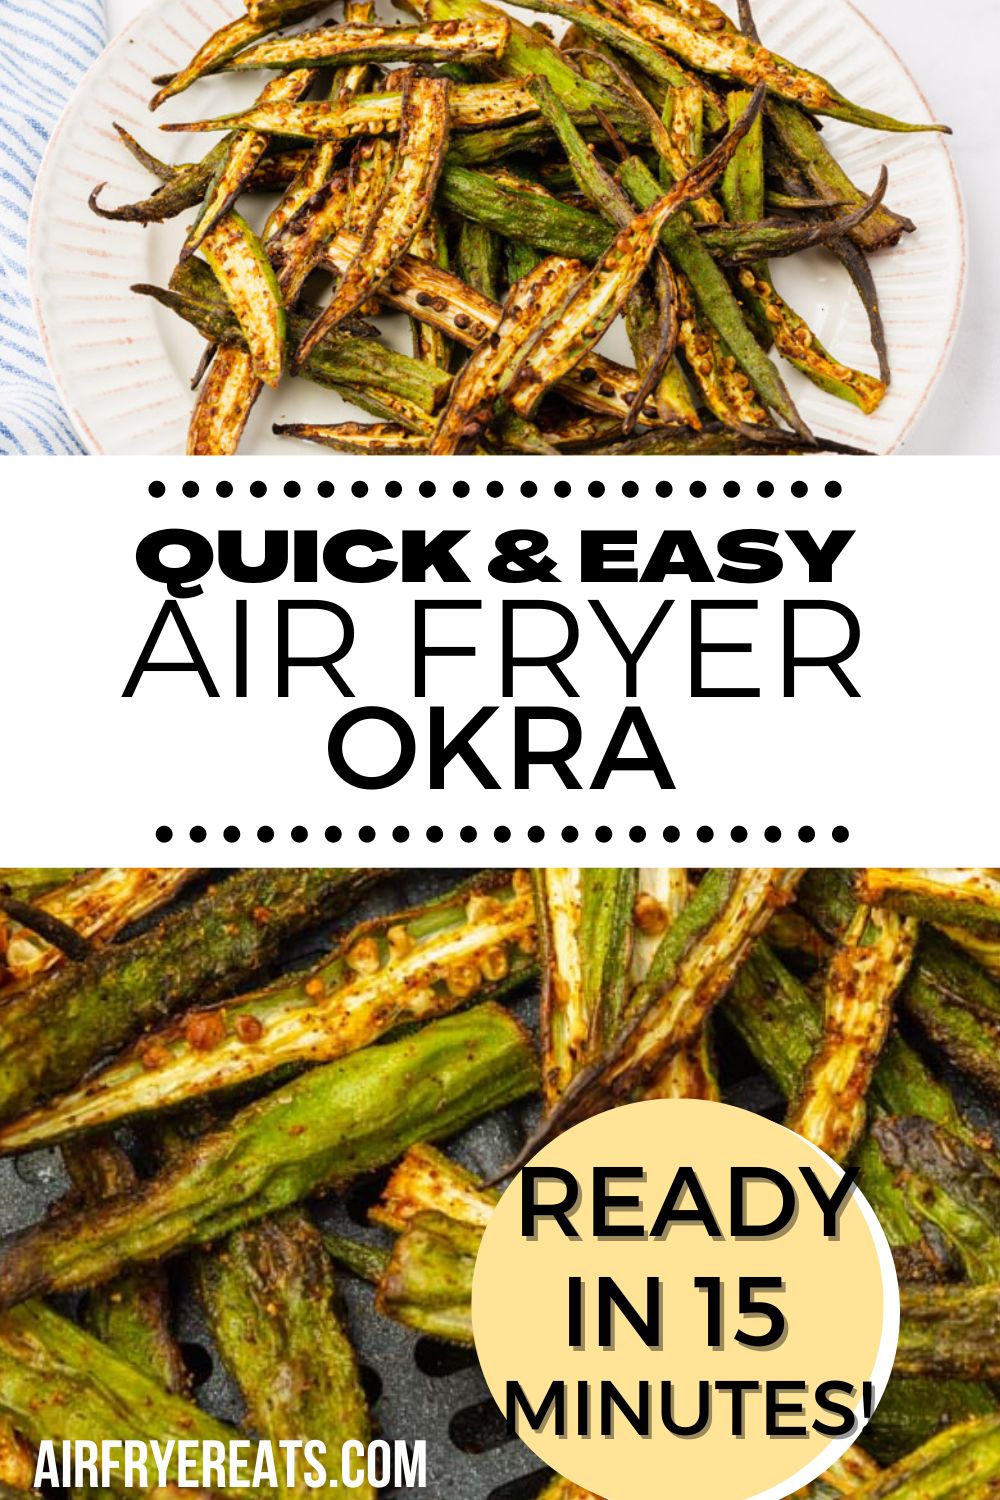 images of crispy air fryer okra. Text in white rectangle overlay says "quick and easy air fryer okra". Text in yellow circle at bottom of image says "ready in 15 minutes".